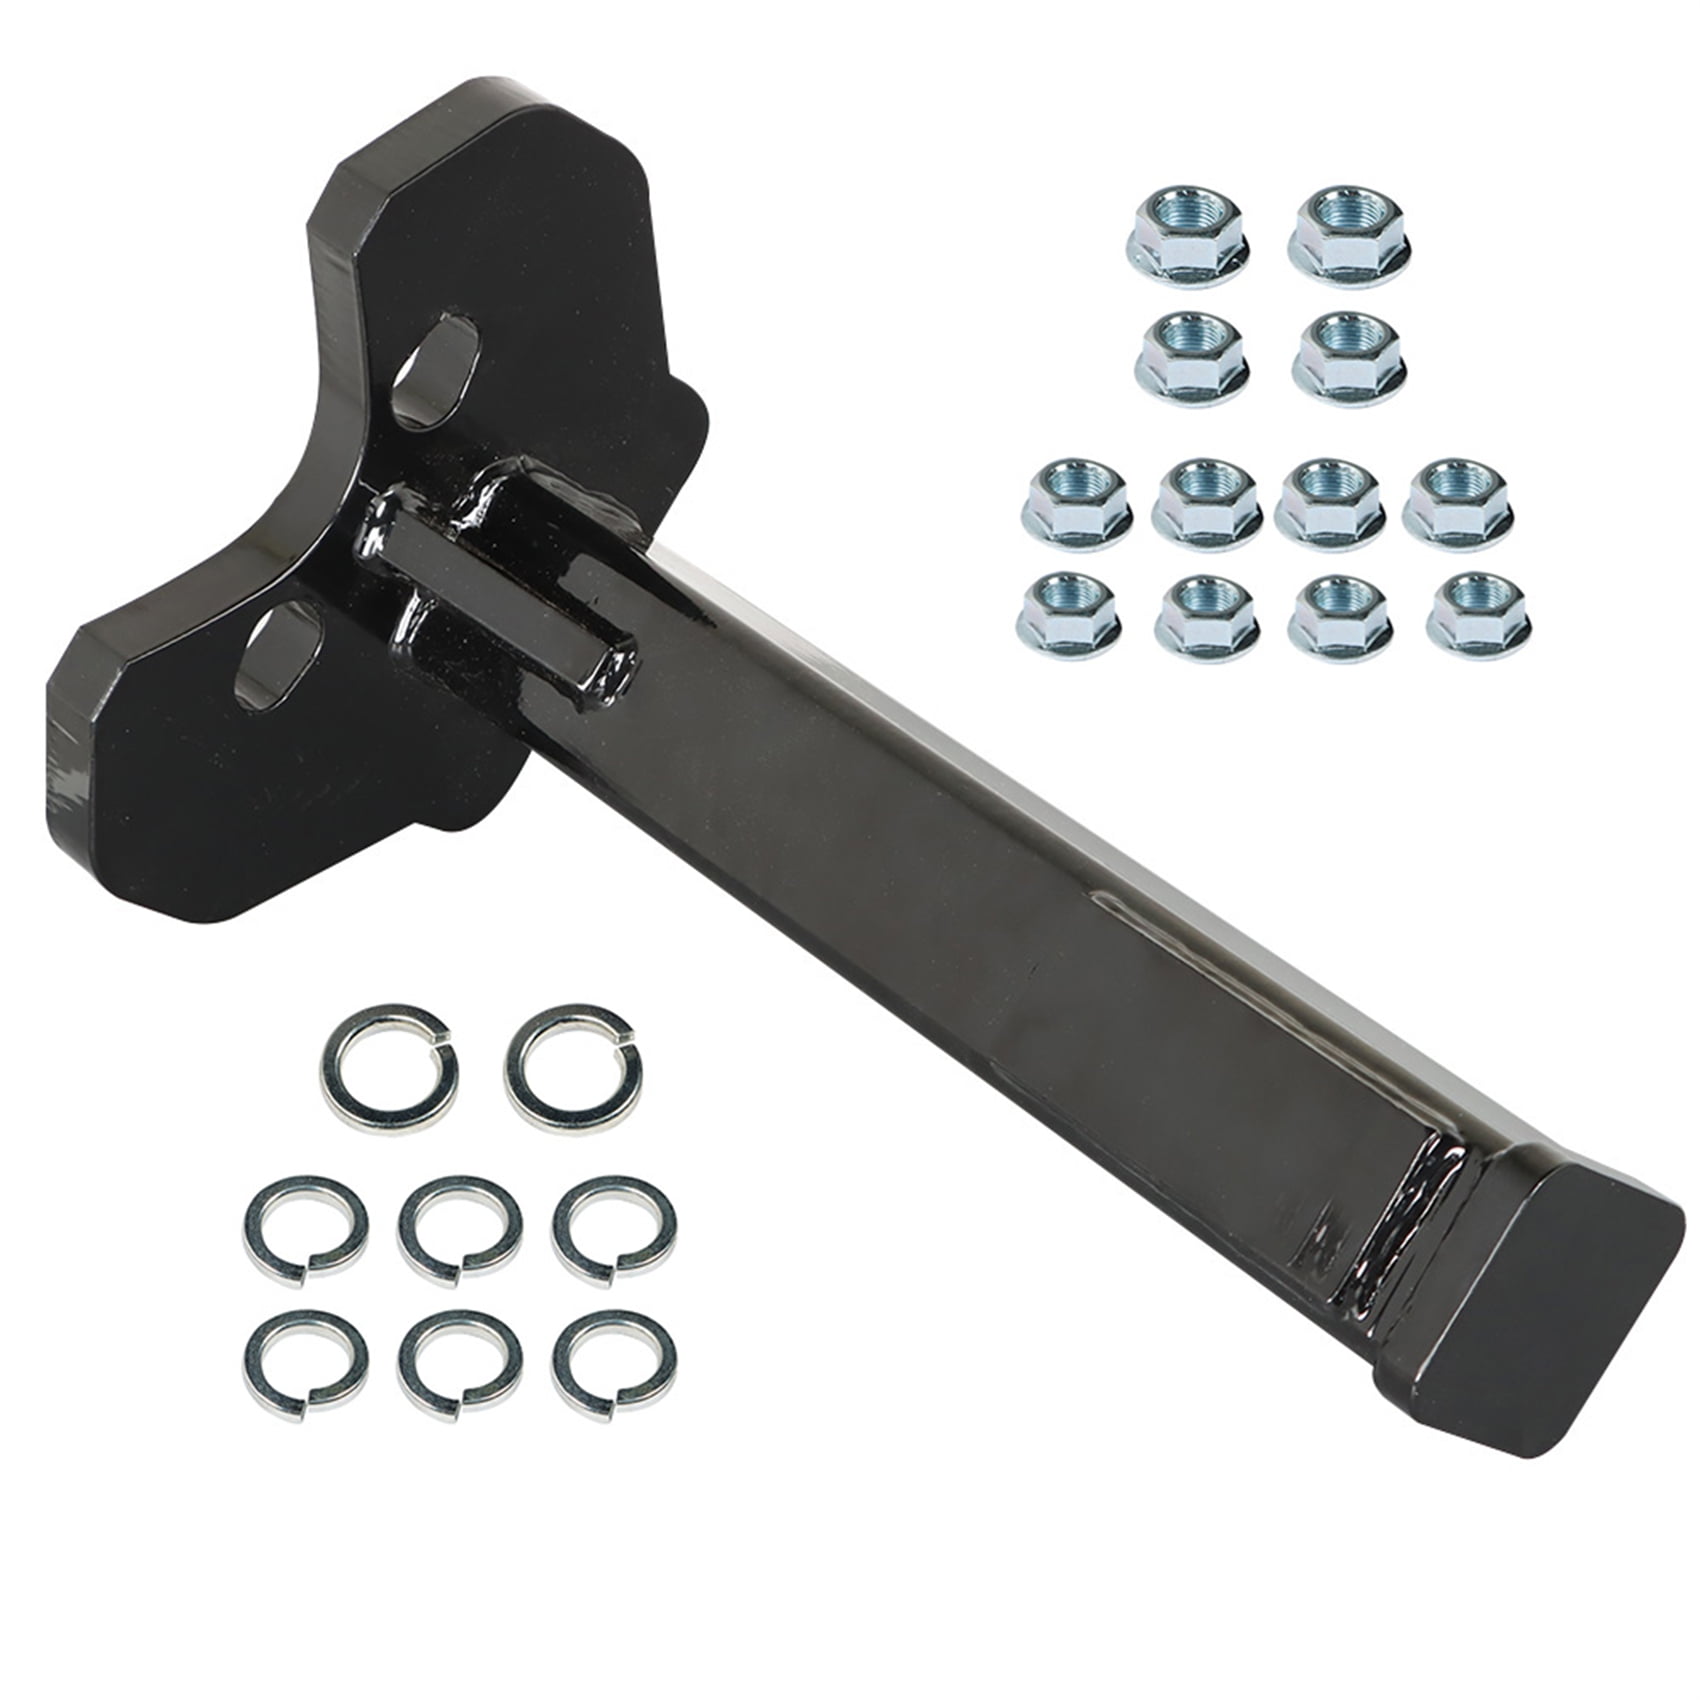 Wheel Hub Removal Tool 8629 Compatible with All Axle Bolt Hubs 6 and 8 Lug Hubs Universal Wheel Bearing Removal Tool with Nuts 5 